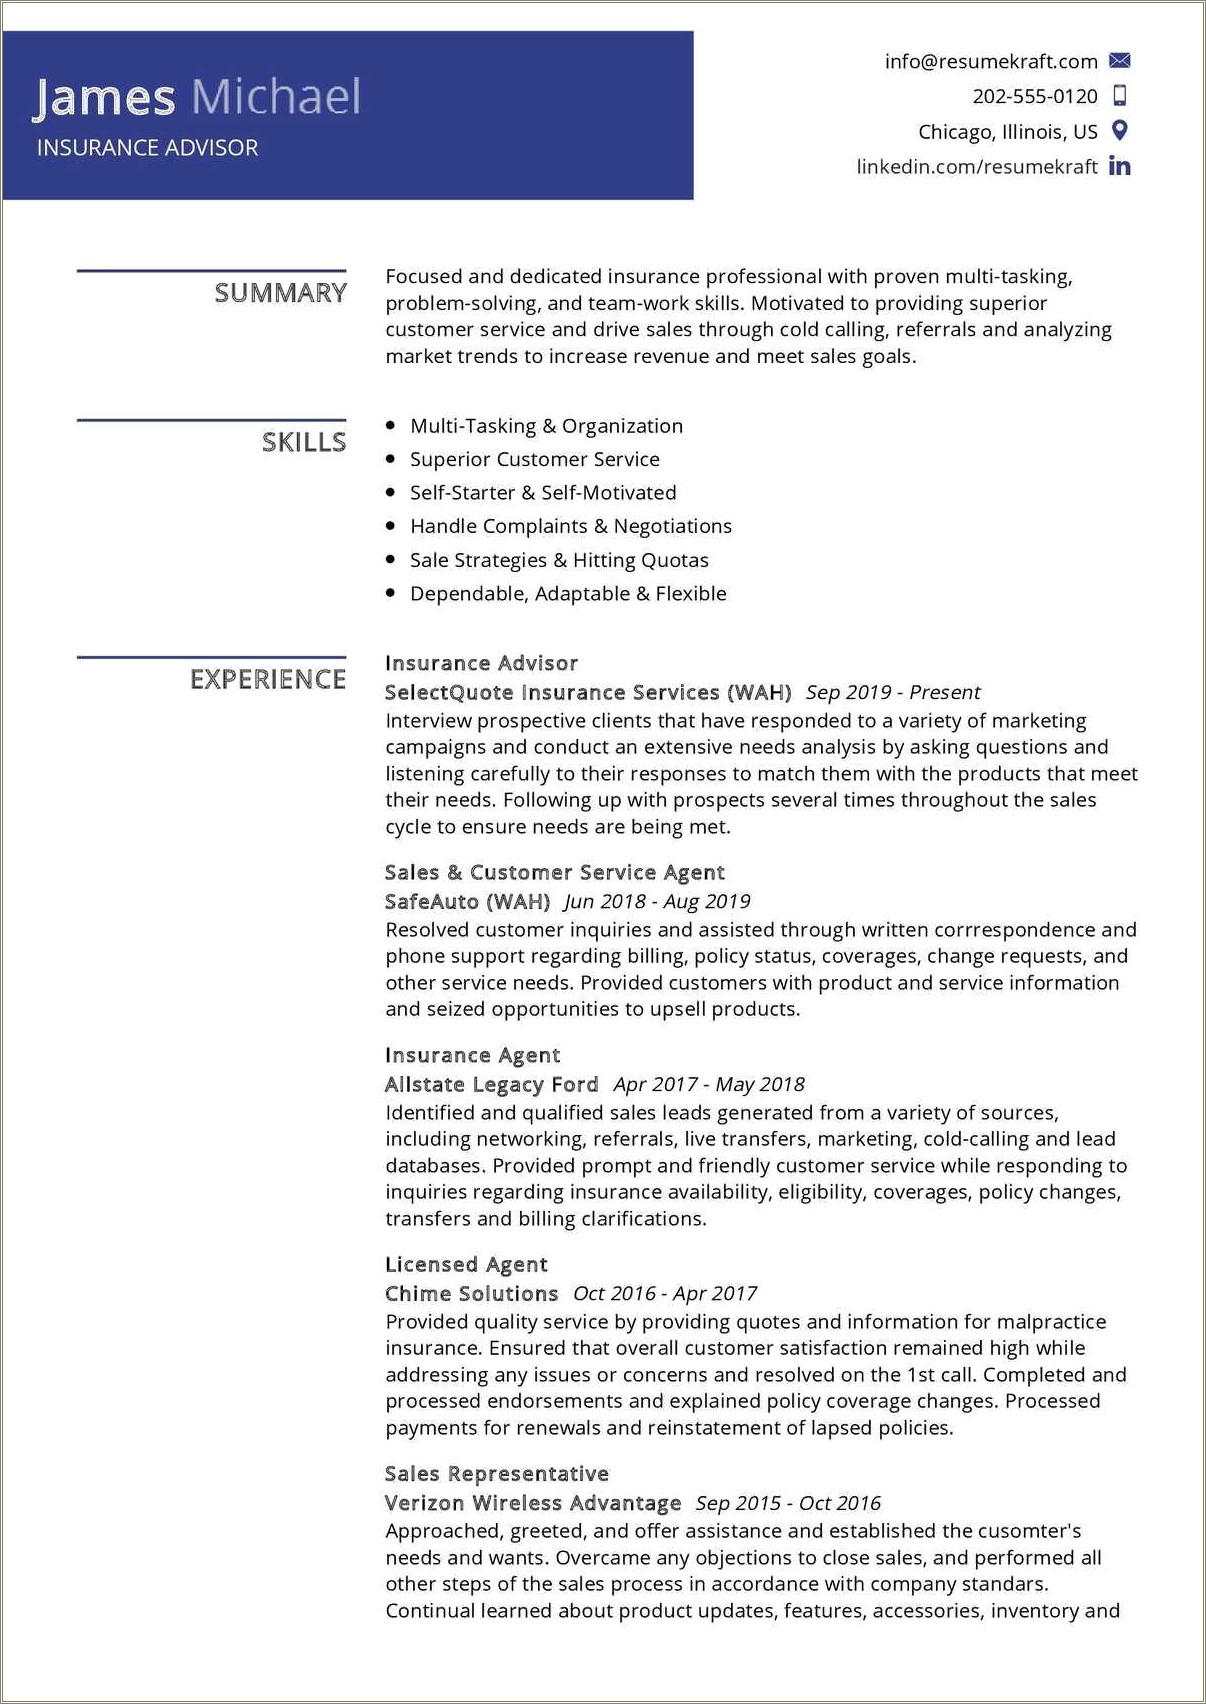 Resume Objective Examples For Insurance Agent